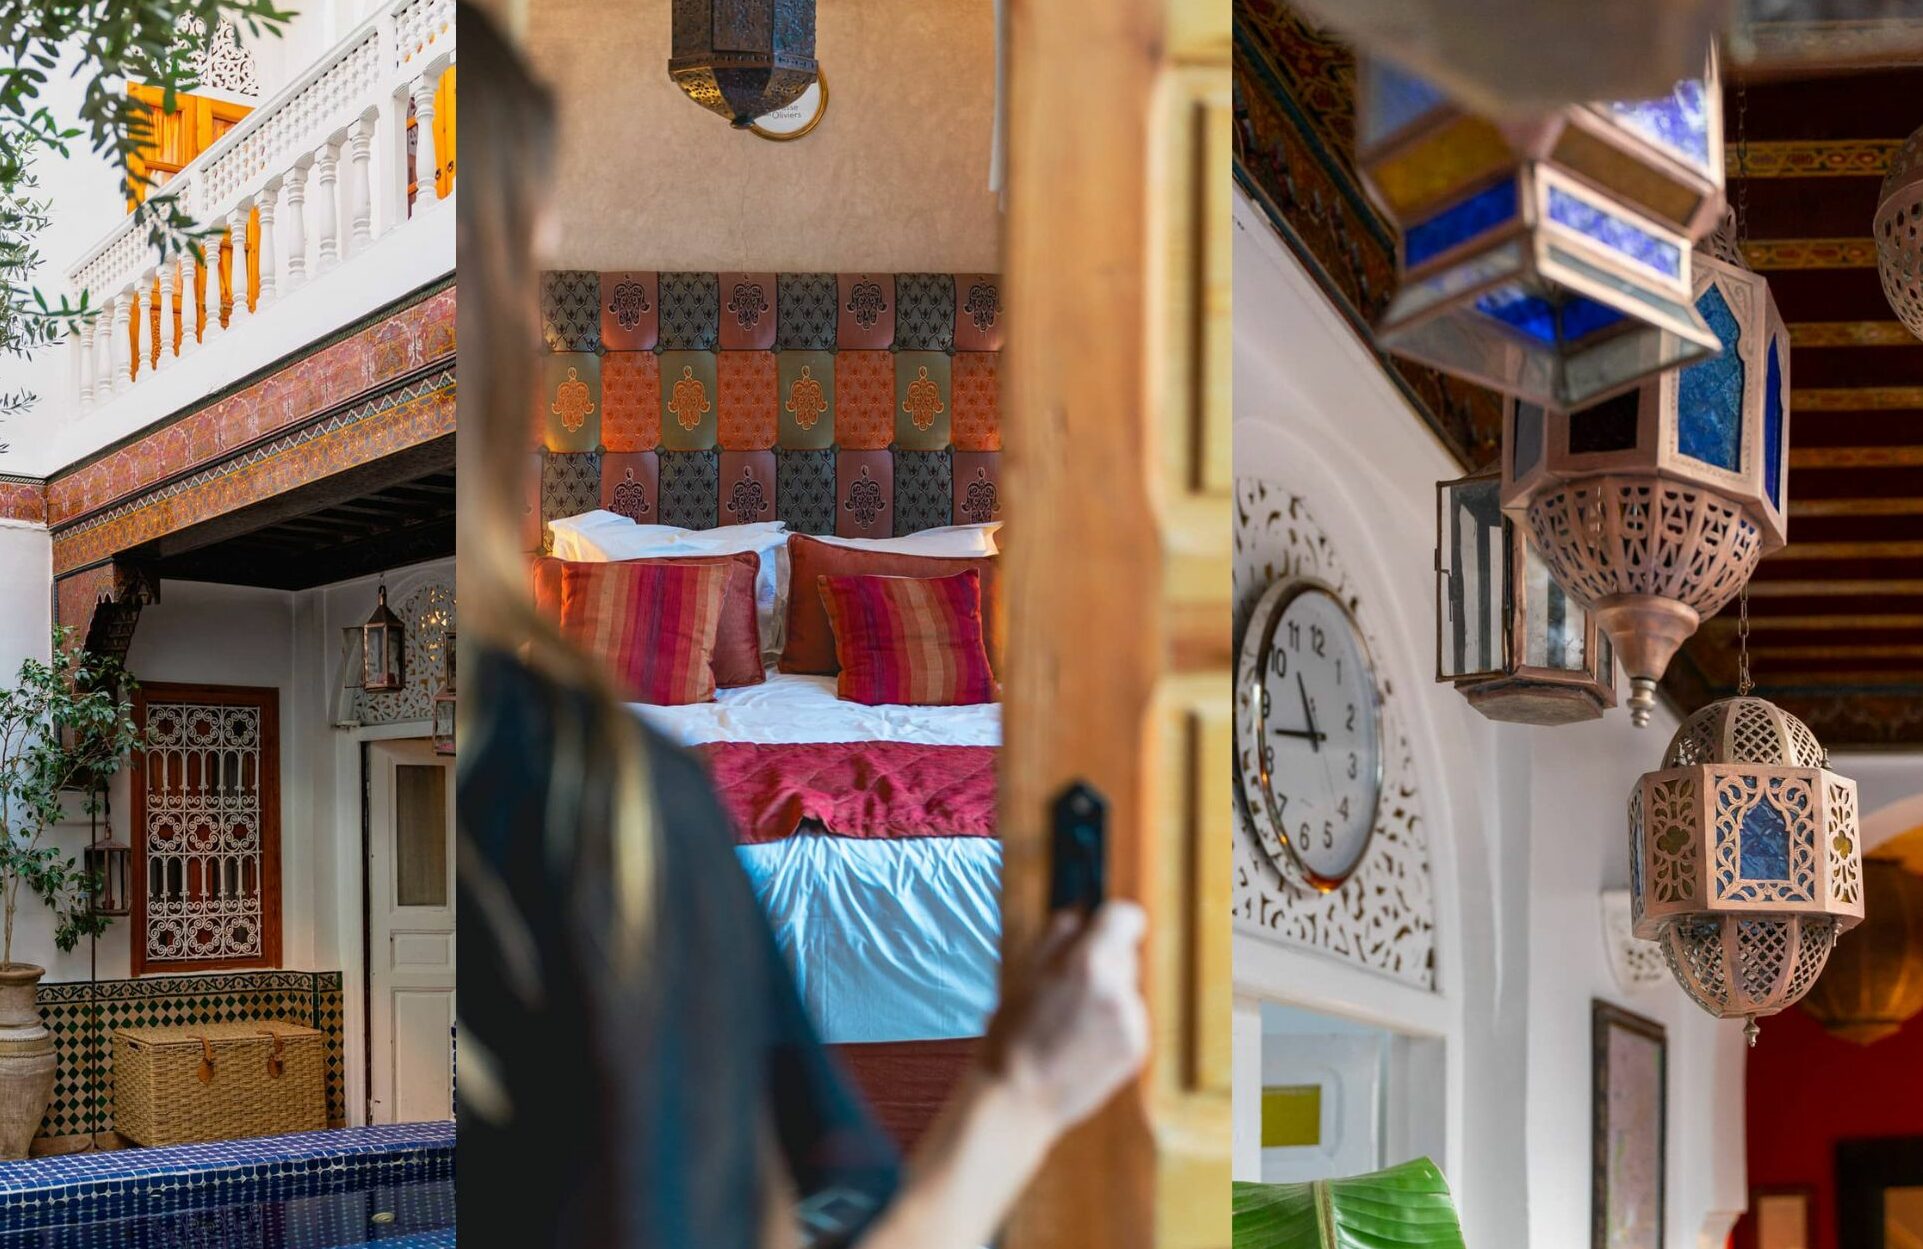 Where to stay in a riad in the Medina of Marrakech?